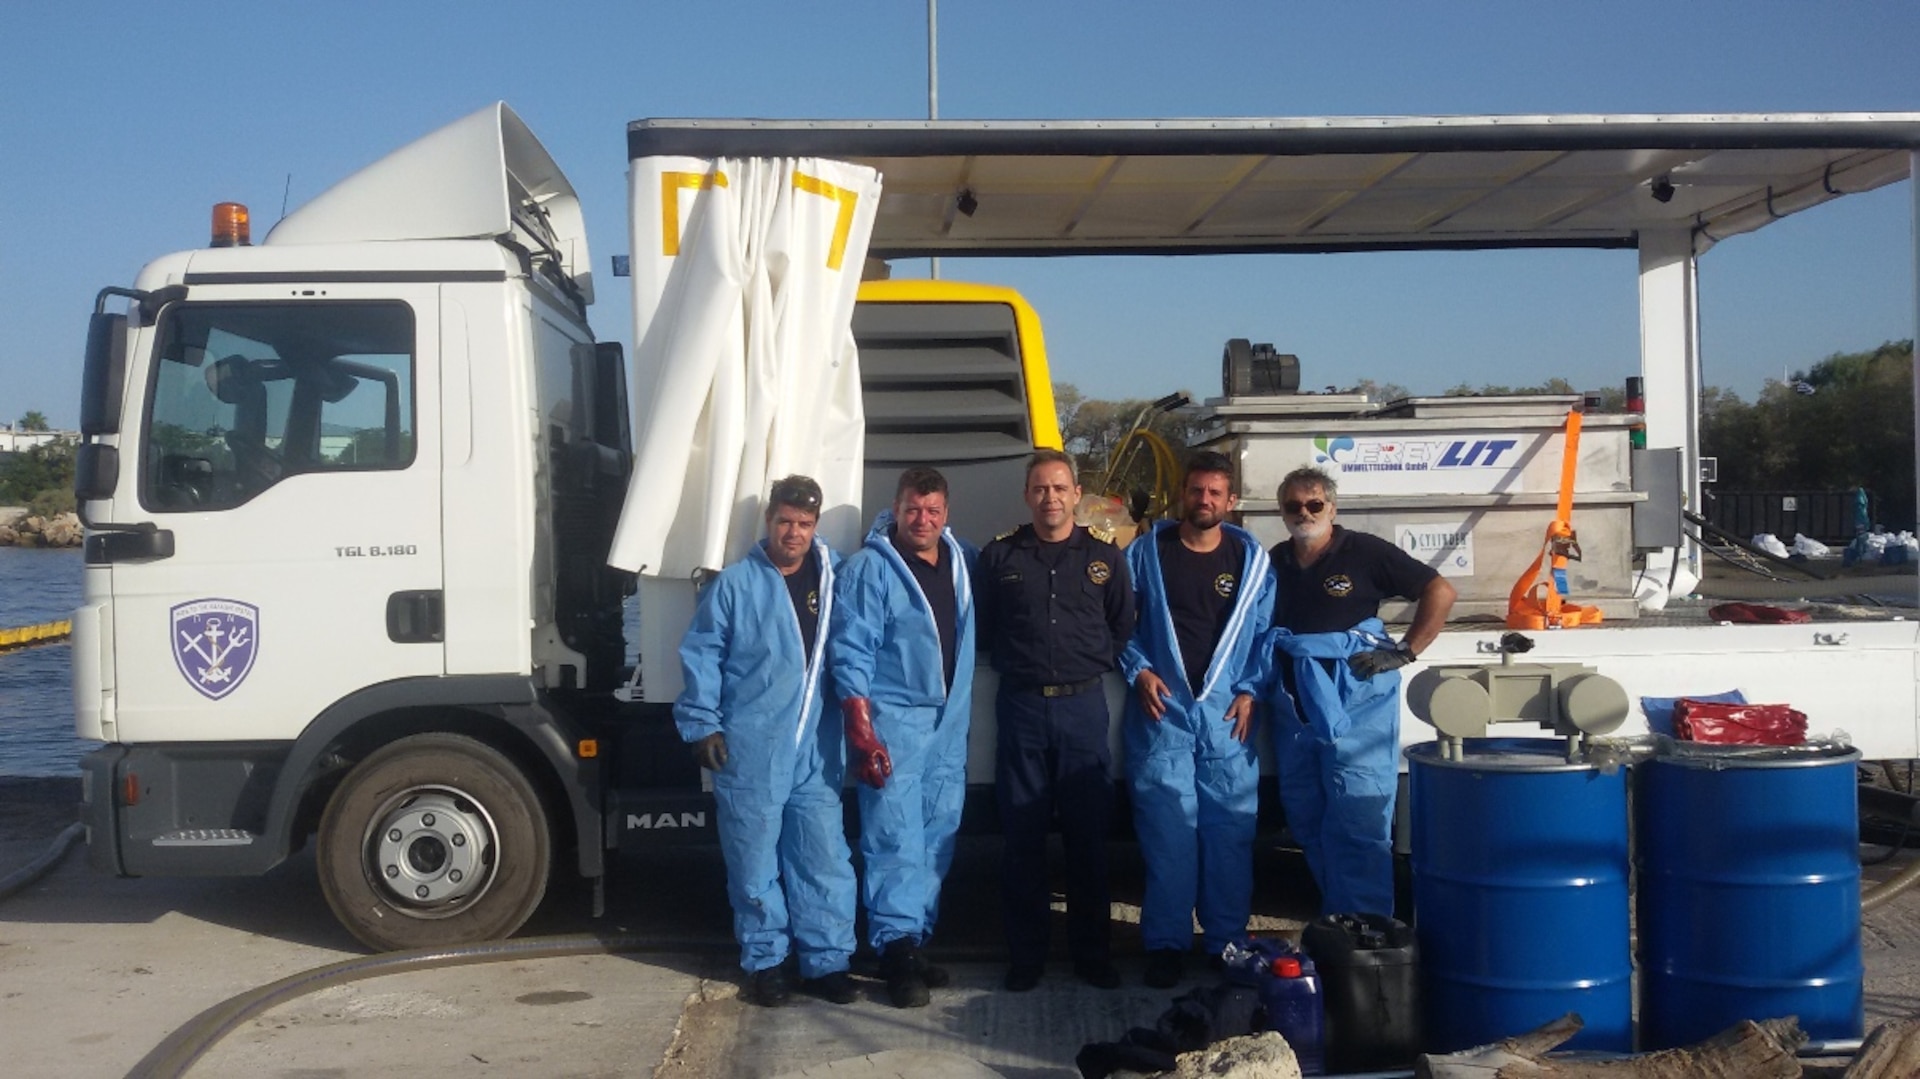 Oil spill clean-up team members